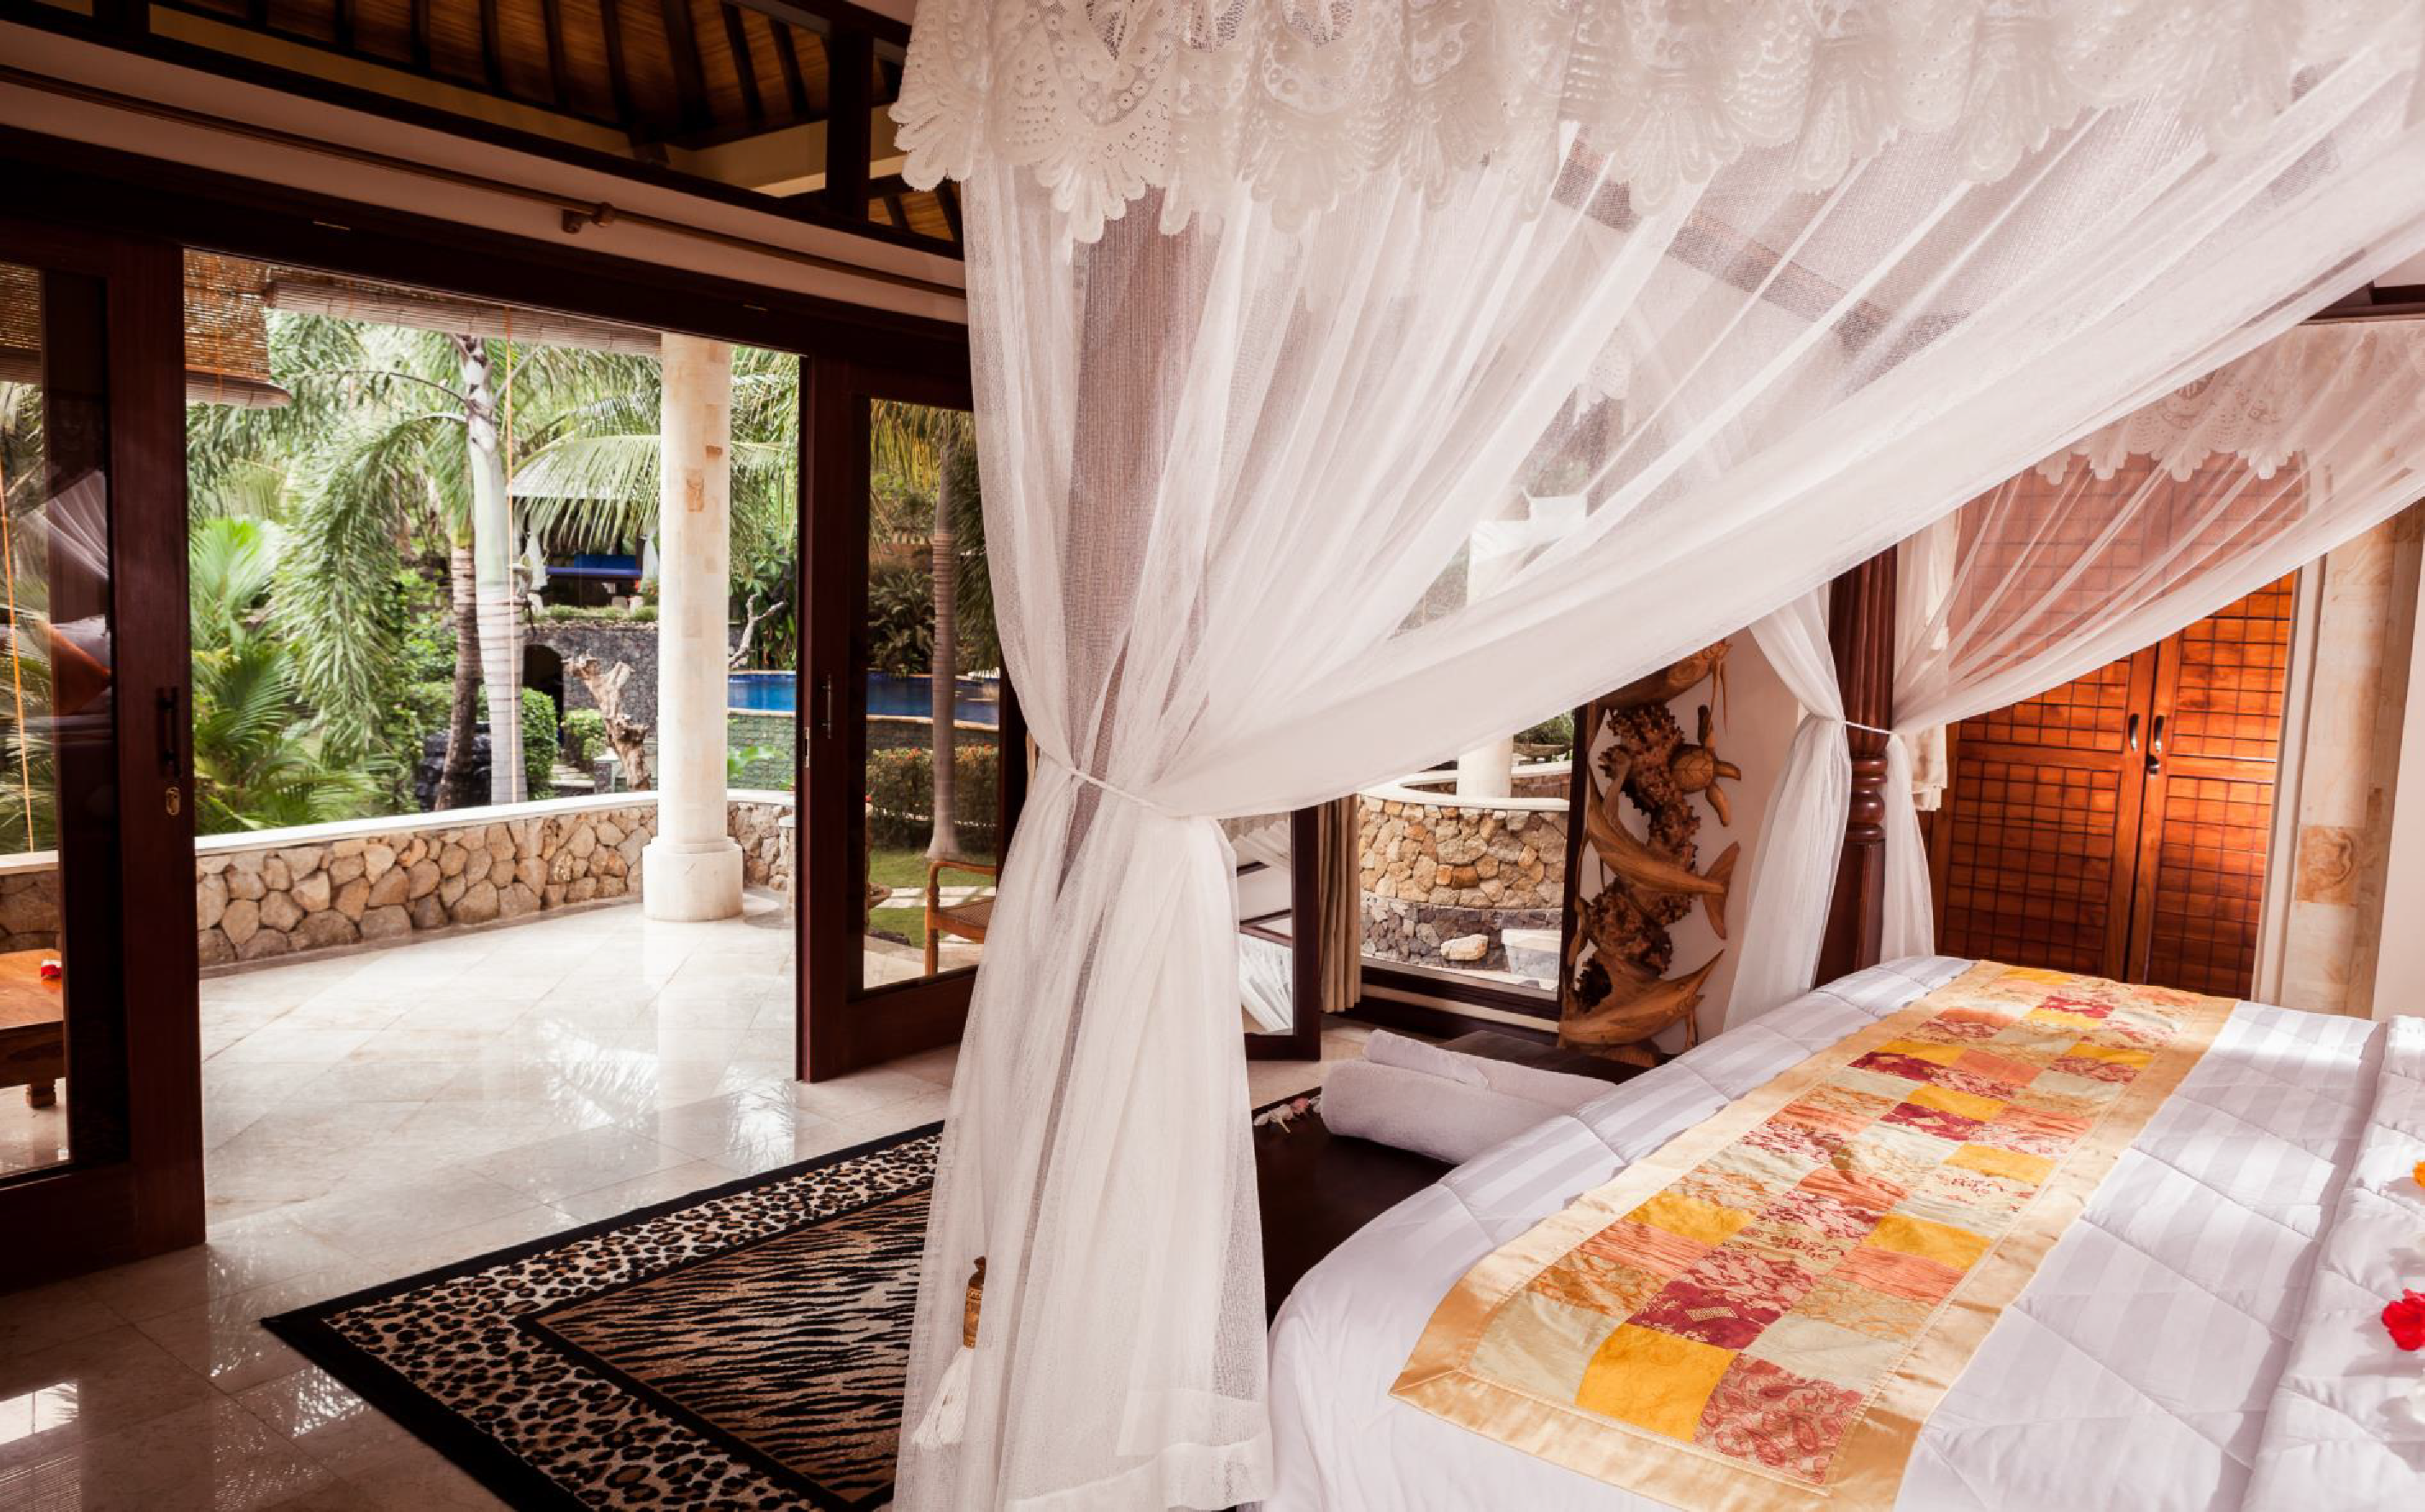 EXOTIC BALI FOR TWO